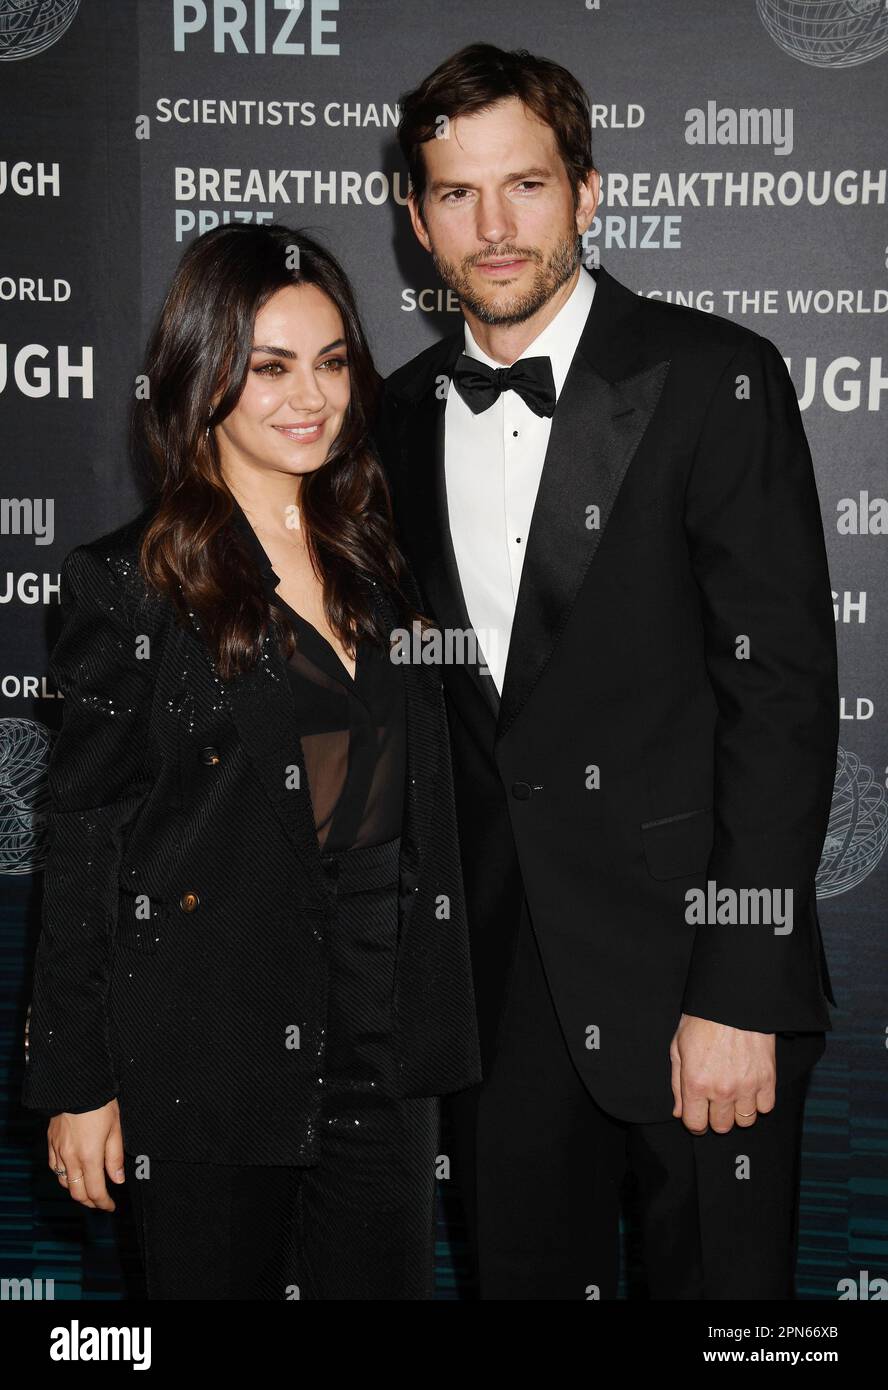 LOS ANGELES, CALIFORNIA - APRIL 15: (L-R) Mila Kunis and Ashton Kutcher attend the Ninth Breakthrough Prize Ceremony at Academy Museum of Motion Pictu Stock Photo